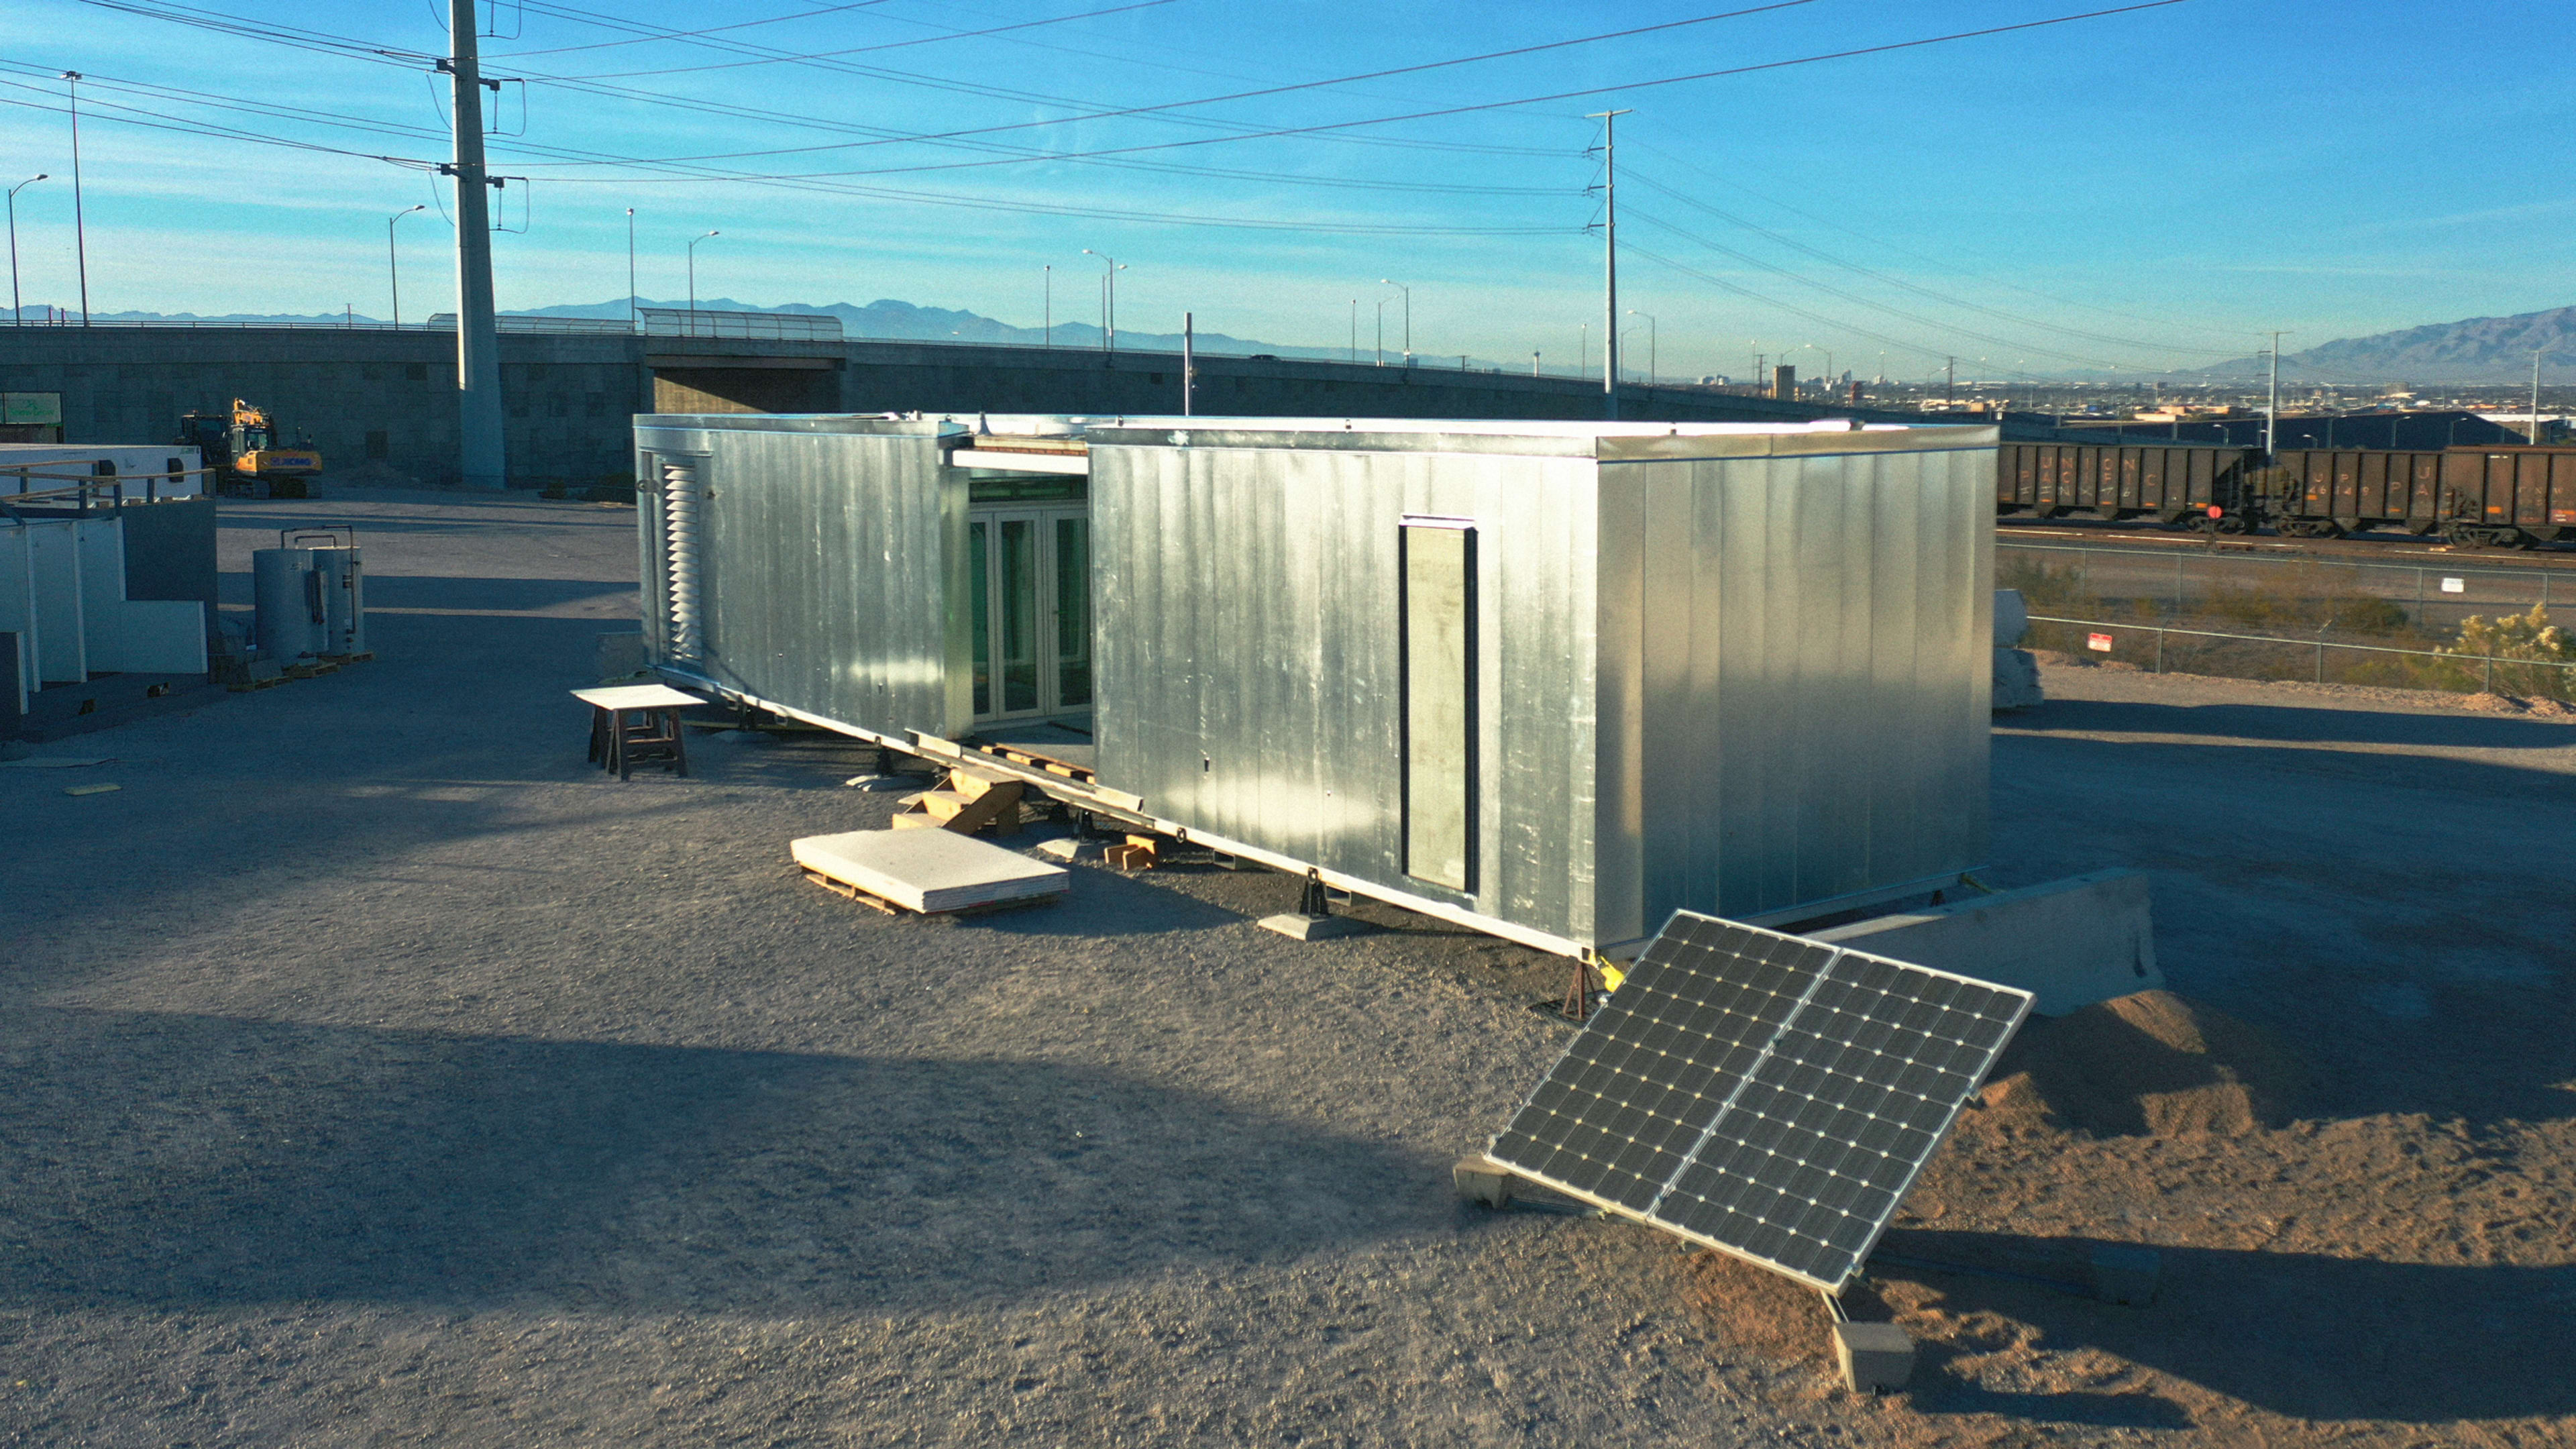 Cheap, green, and beautiful: The future of housing, according to this year’s Solar Decathlon winners